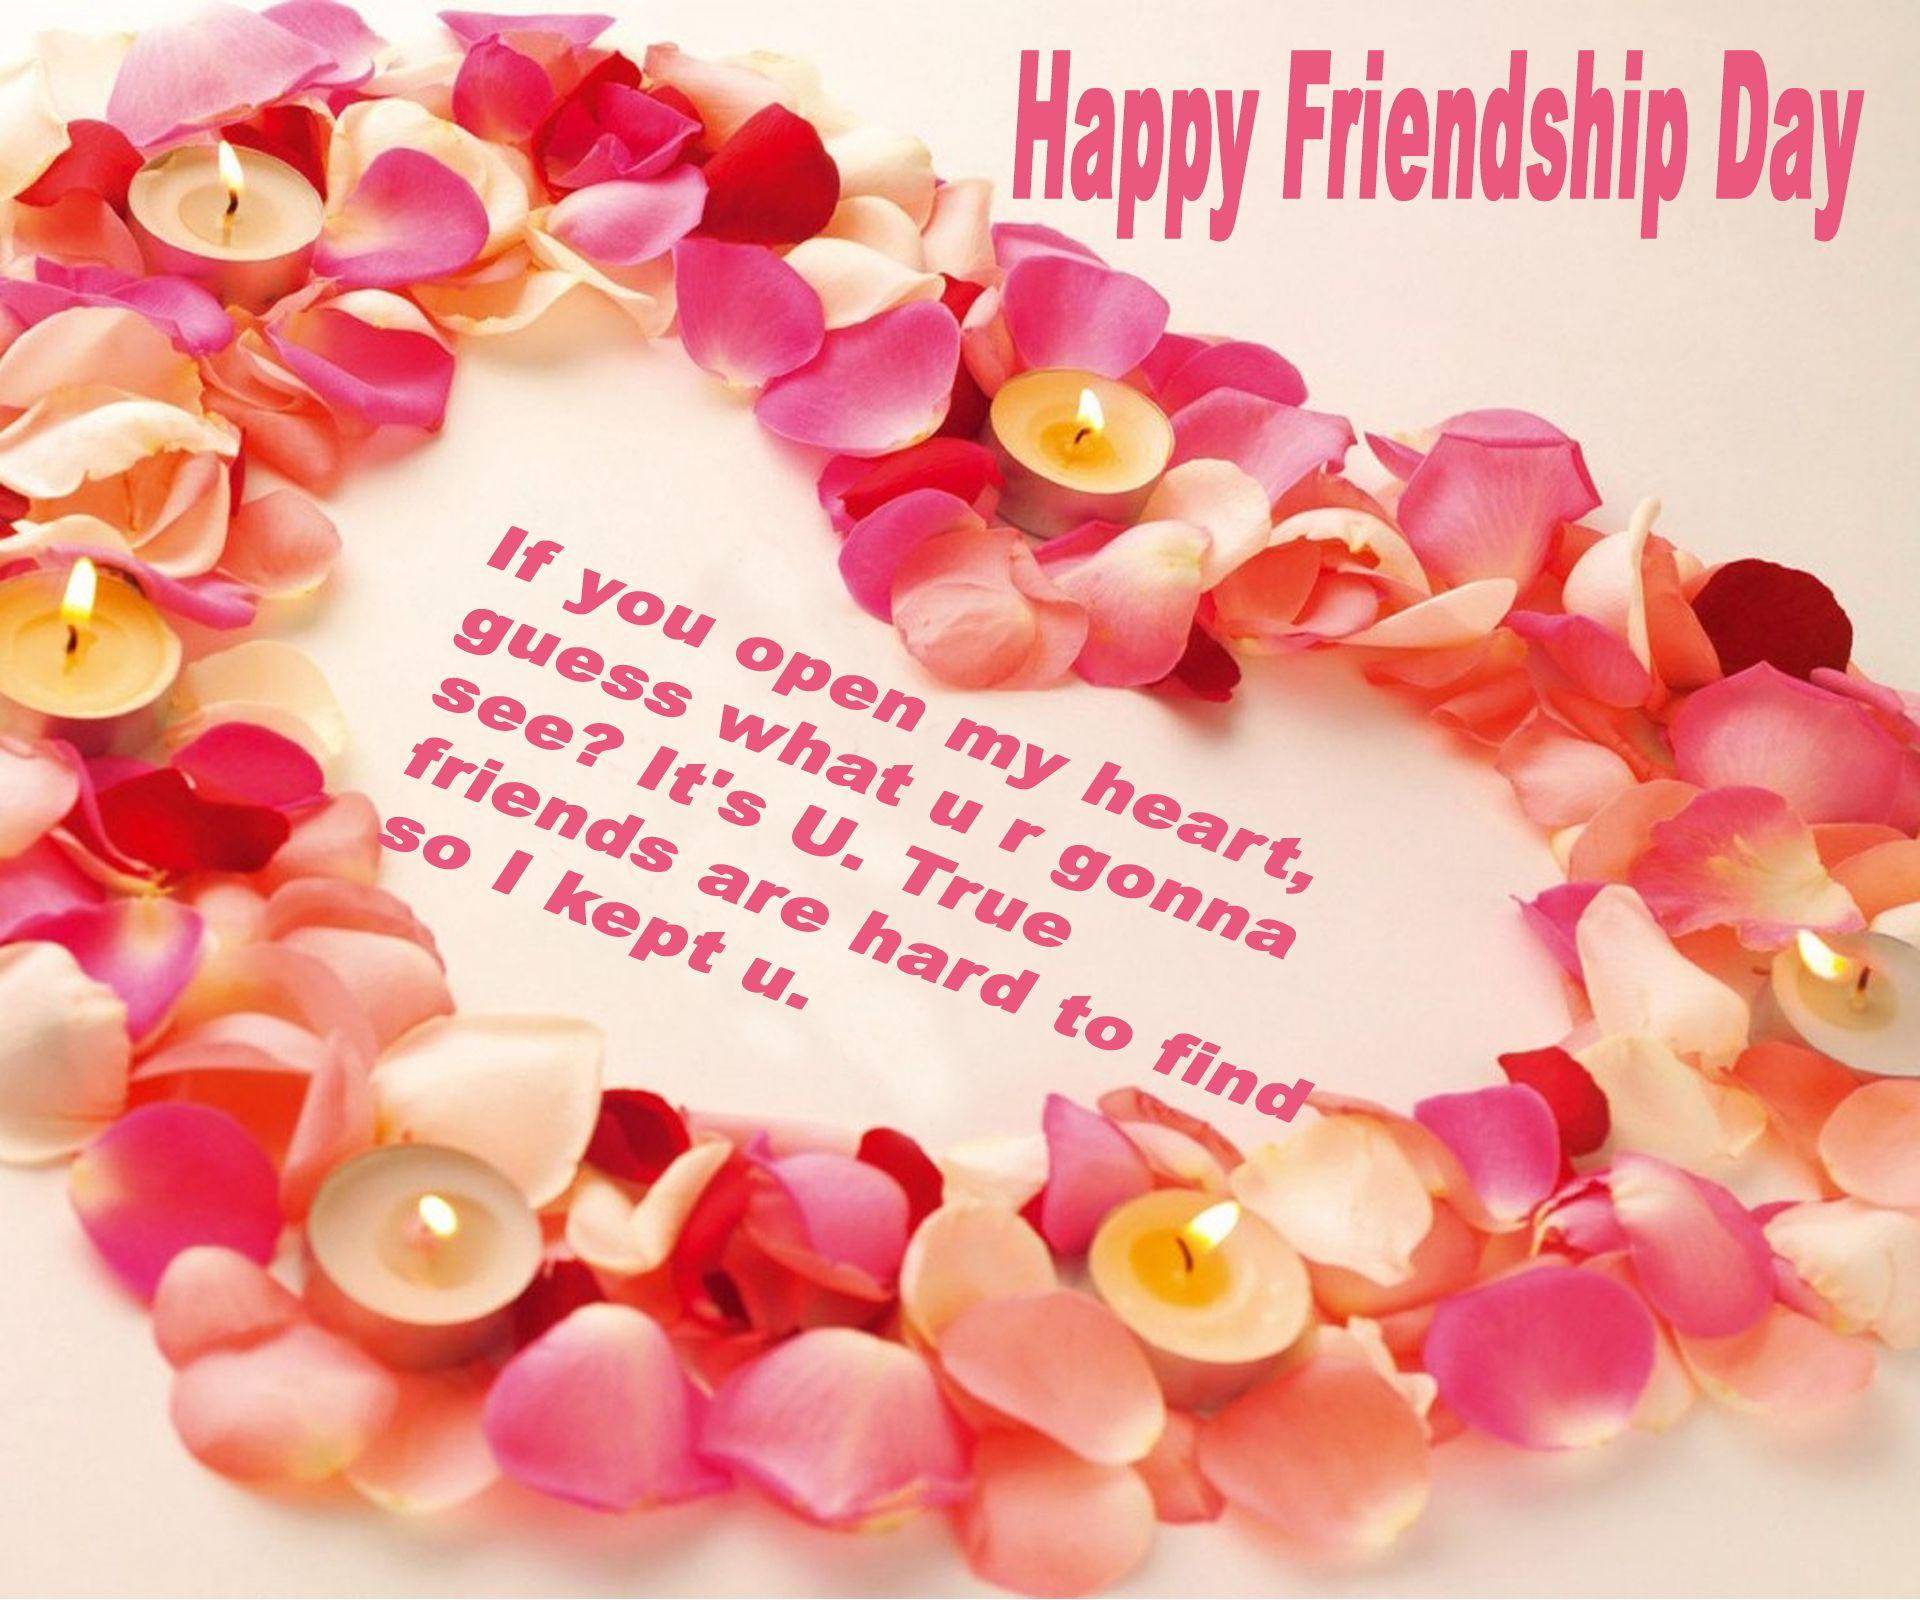 Friendship Day Special Wallpapers - Wallpaper Cave